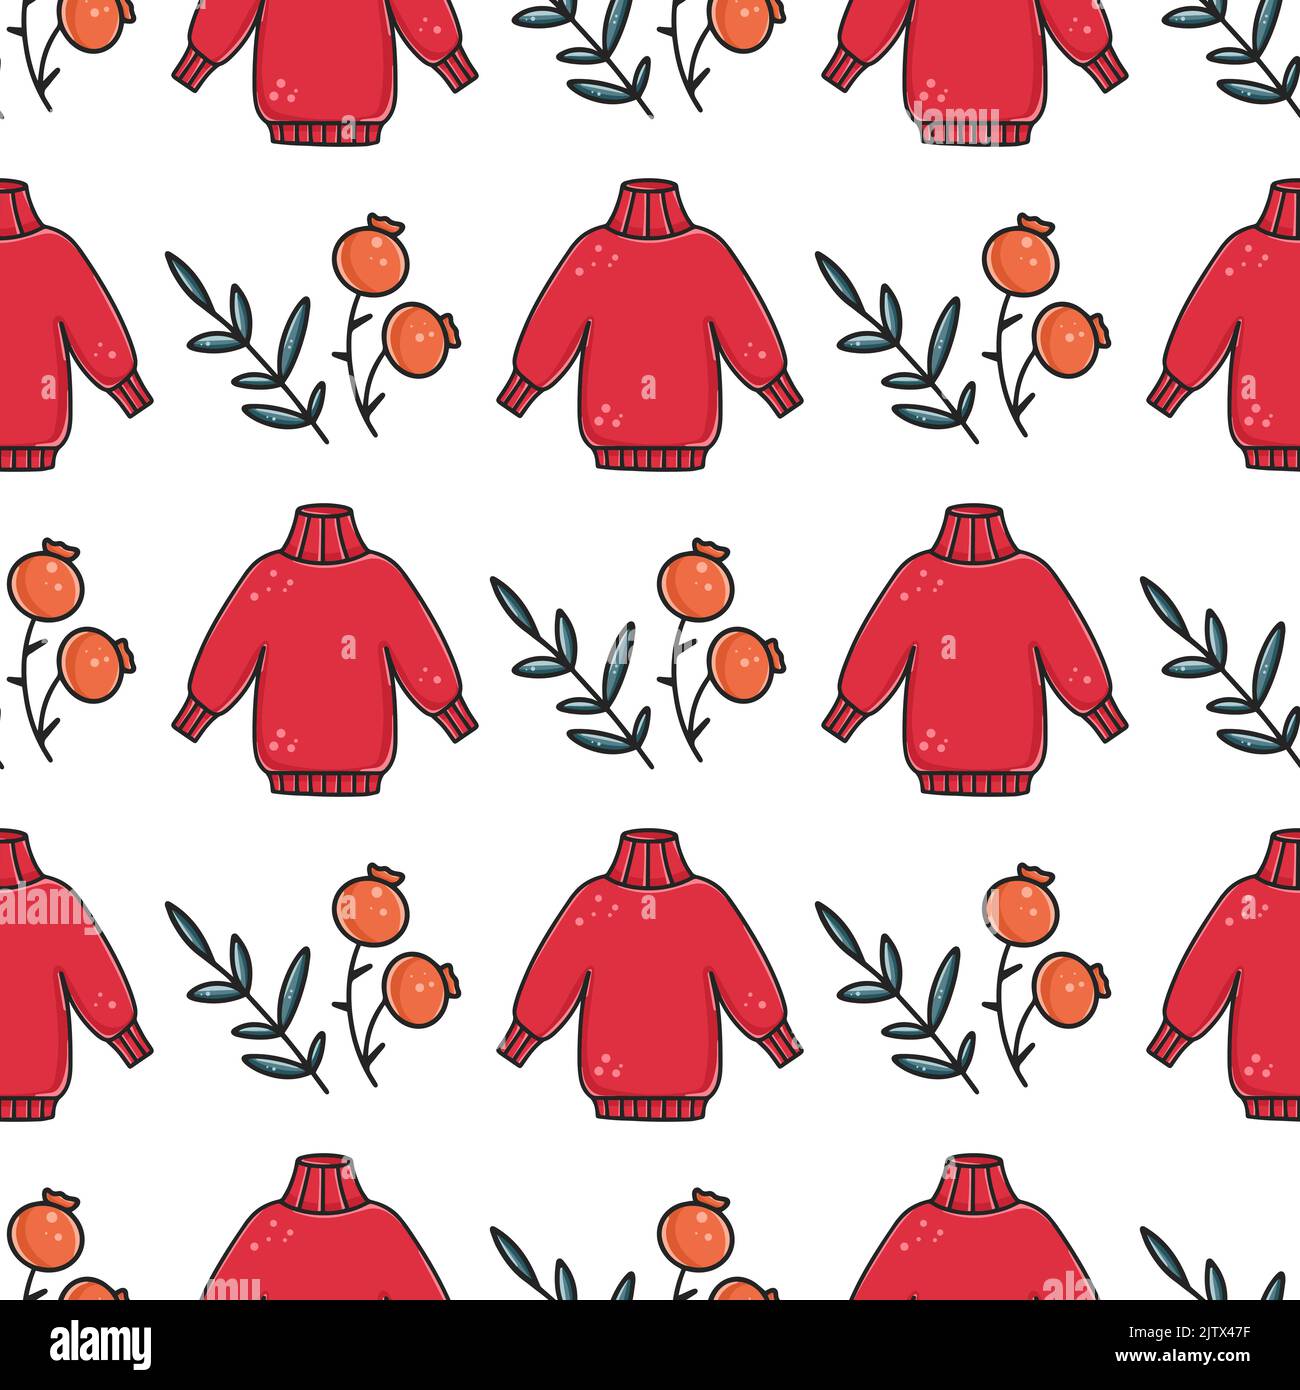 Autumn seamless pattern with knitted sweaters, berries and leaves. Cozy fall background. Print with autumn or winter symbols for textiles, paper Stock Vector